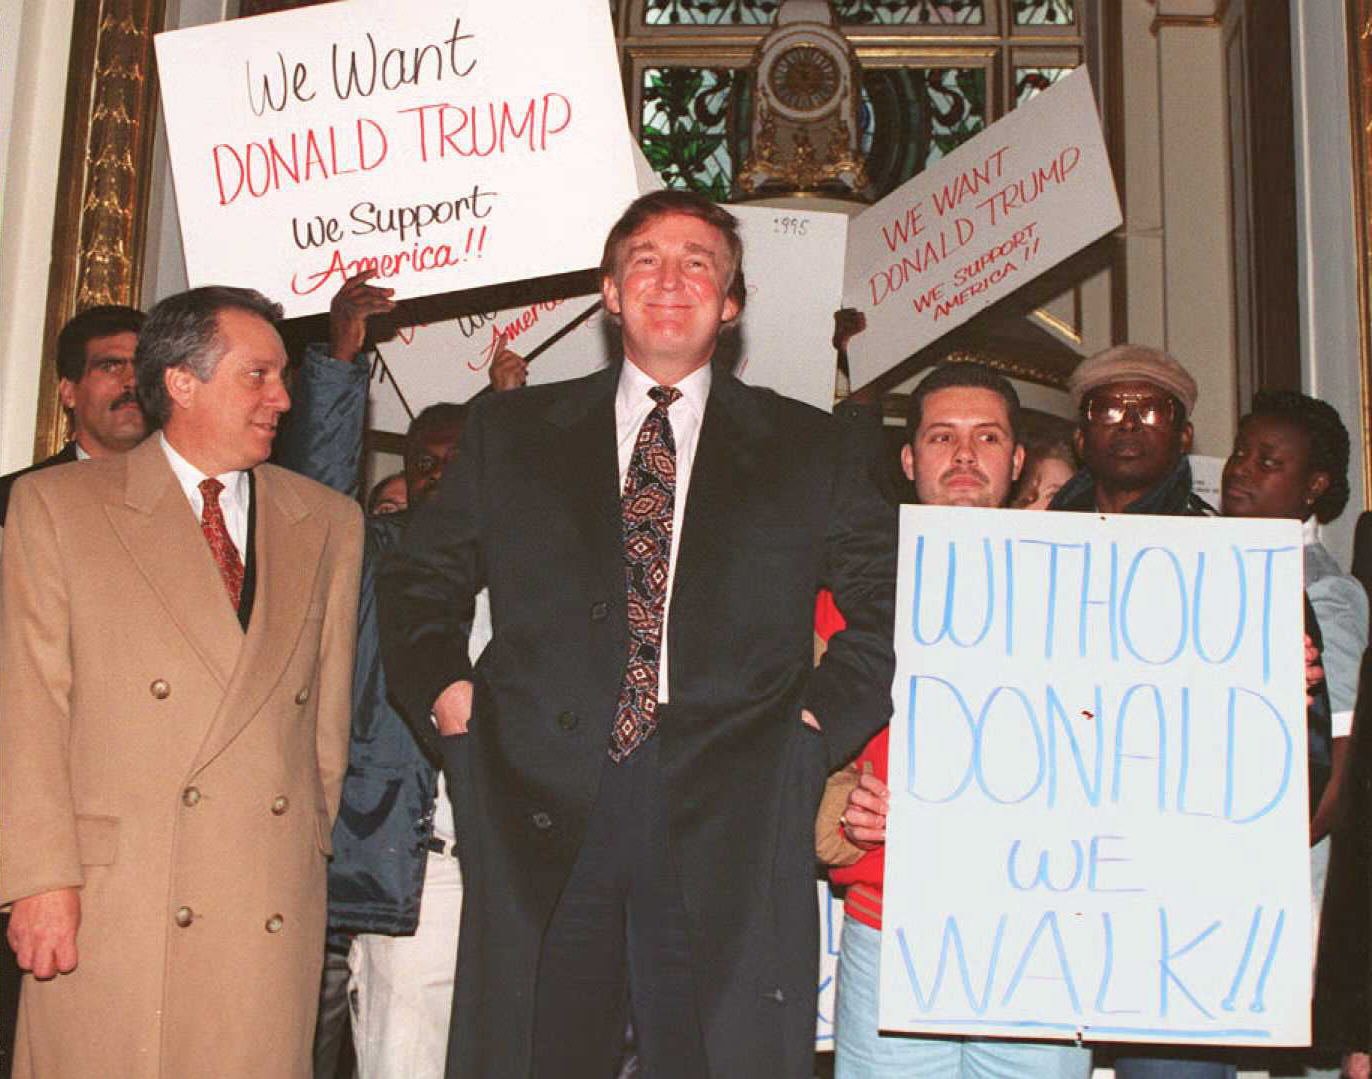 NEW YORK, NY - DECEMBER 21: US business tycoon Donald Trump(C) enters the PLaza Hotel in New York past supporters 21 December 1994. Hundreds of supporters showed up at a news conference where Trump denied a New York newspaper report that the Sultan of Brunei had bid 300 million USD to buy the Manhattan hotel. (Photo credit should read DON EMMERT/AFP/Getty Images)